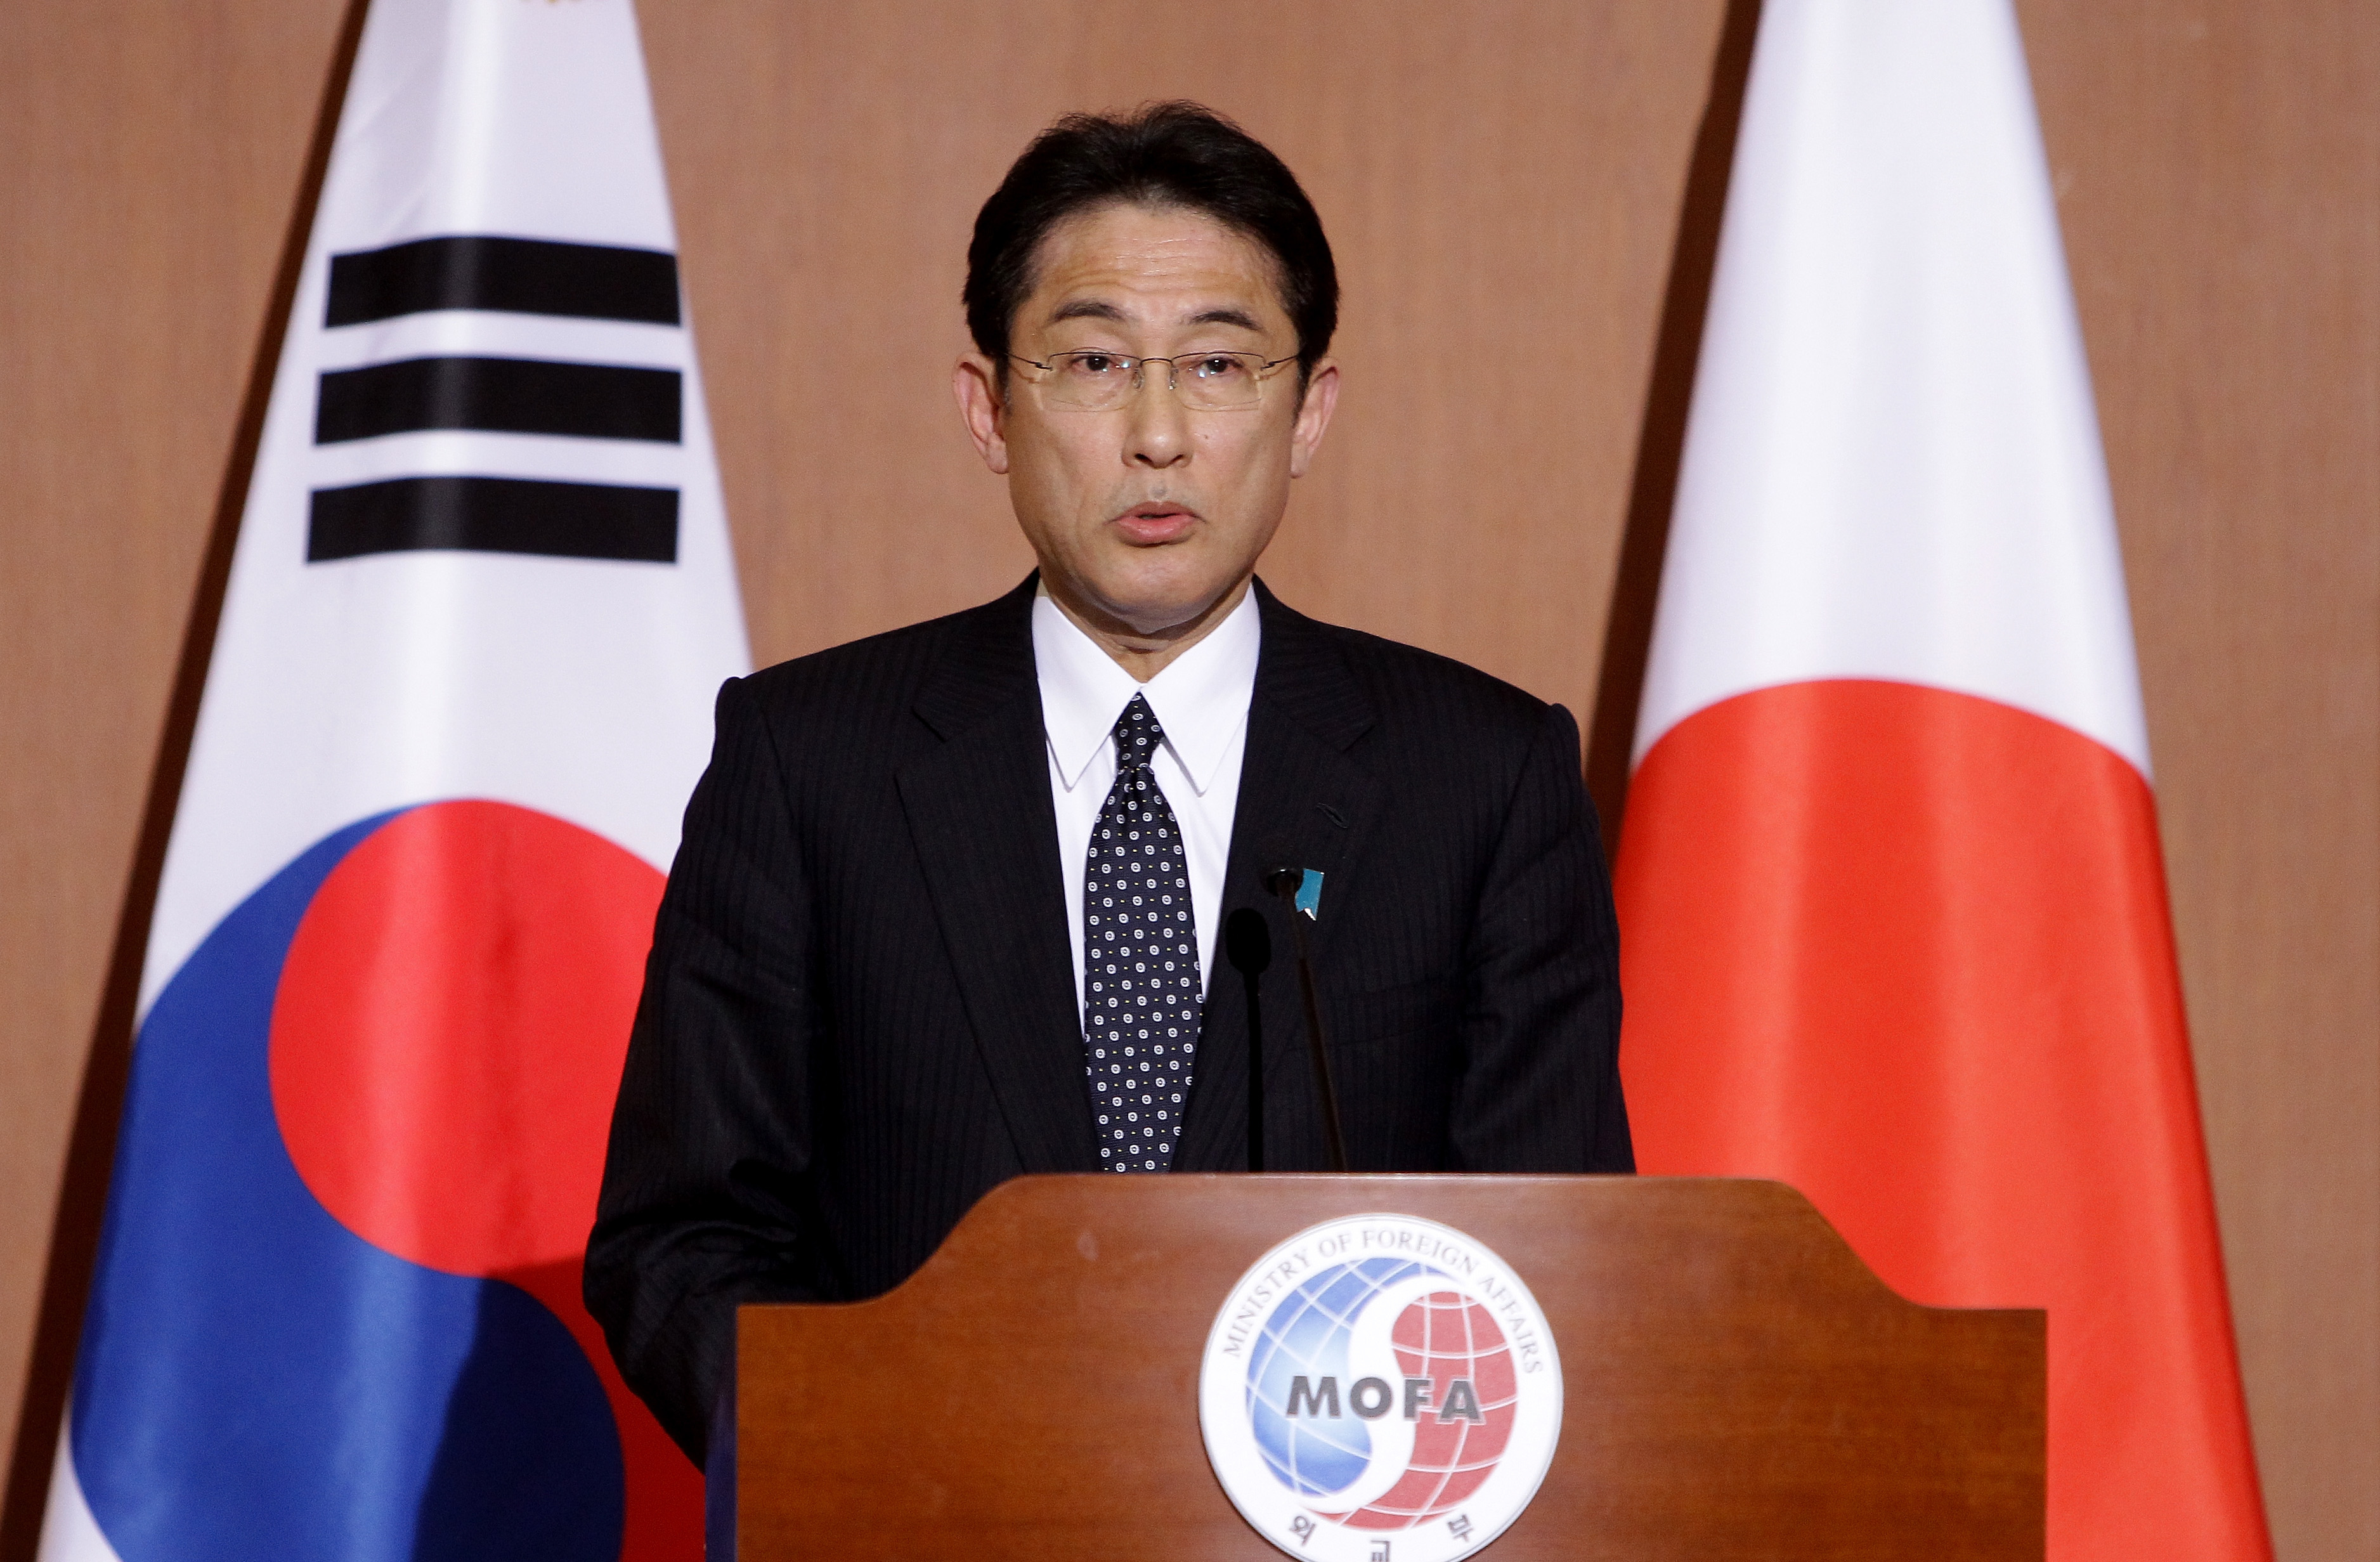 Japanese Foreign Minister Fumio Kishida attends a joint press conference with South Korean Foreign Minister Yun Byung-se (not in pictured) on Dec. 28, 2015, in Seoul (Chung Sung-Jun—Getty Images)